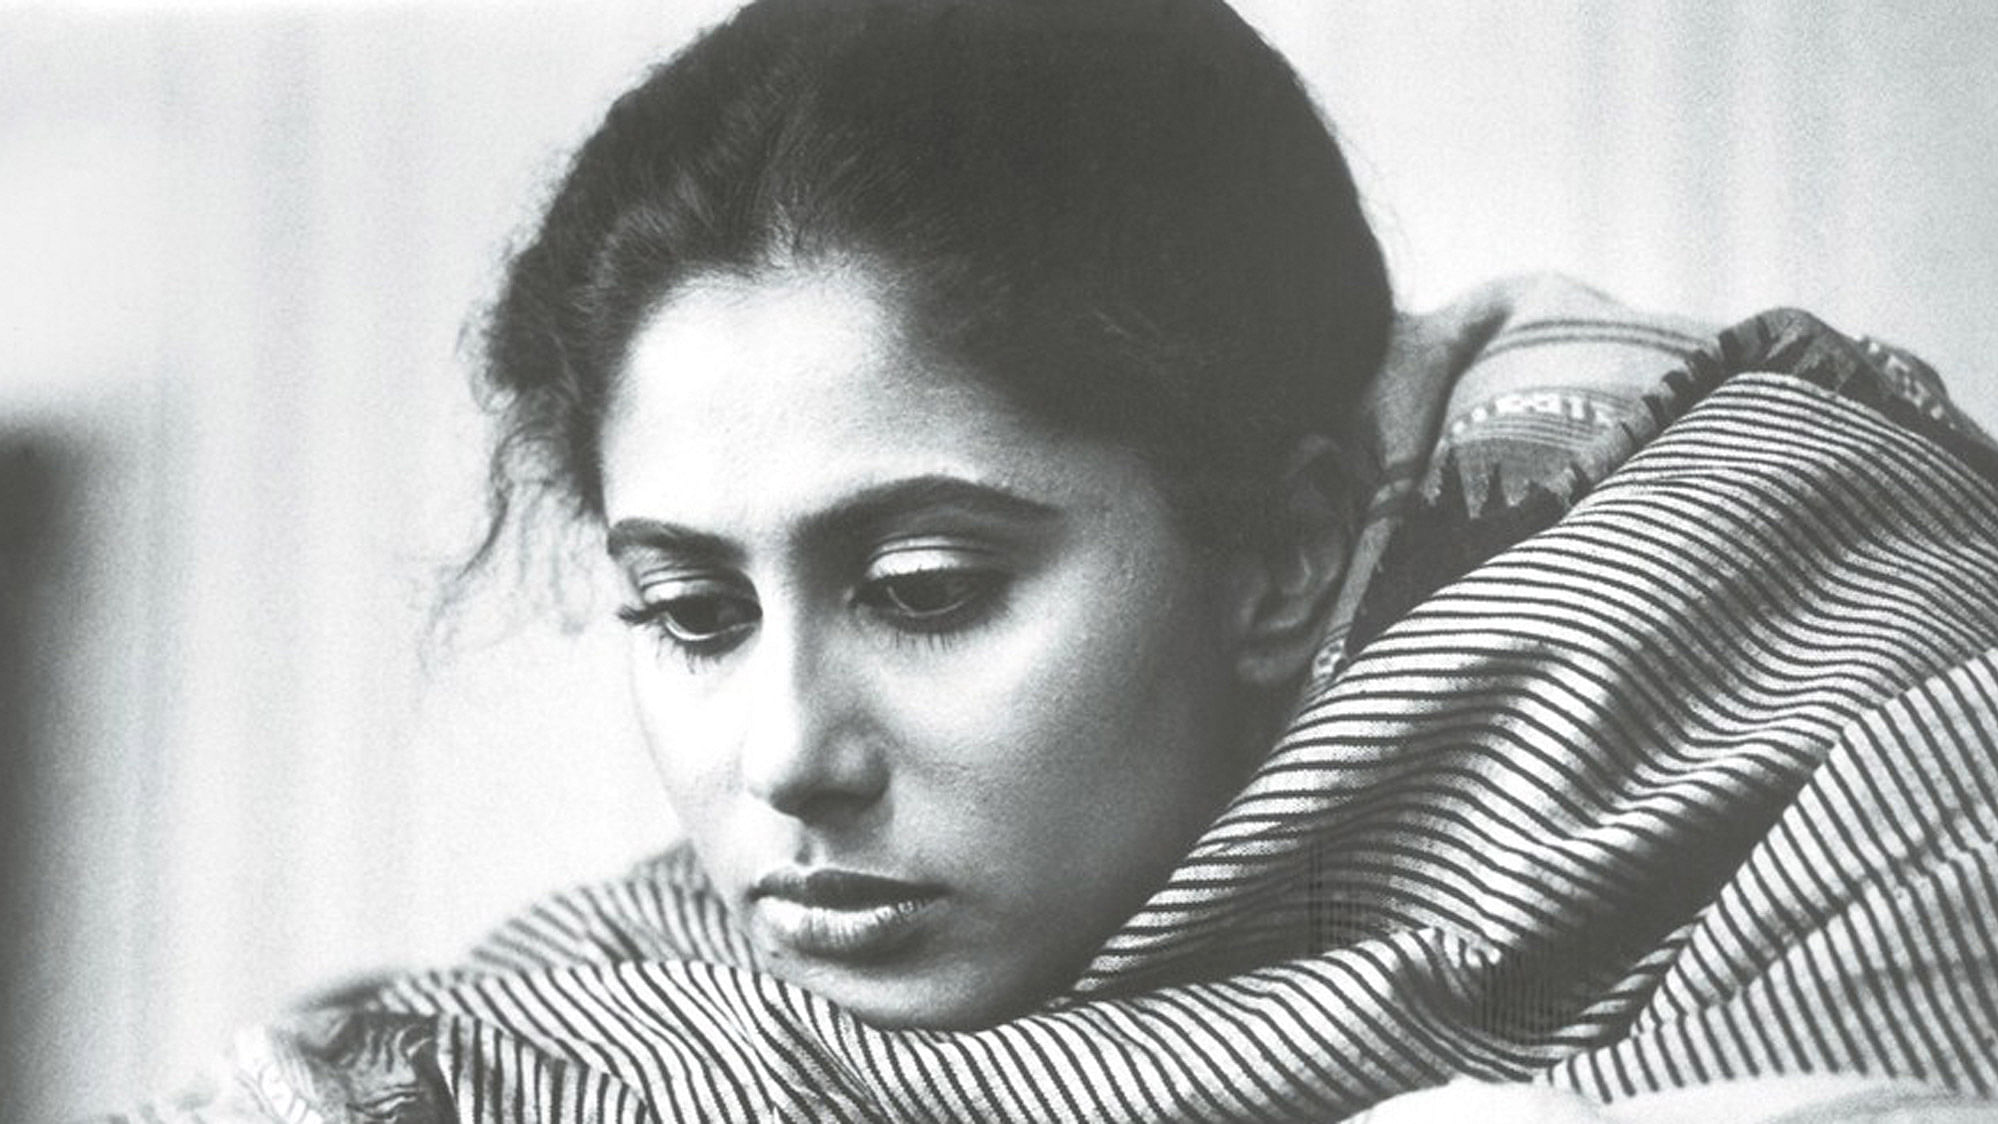 A two day festival of Smita Patil’s films, posters and photographs will be held in Pune.